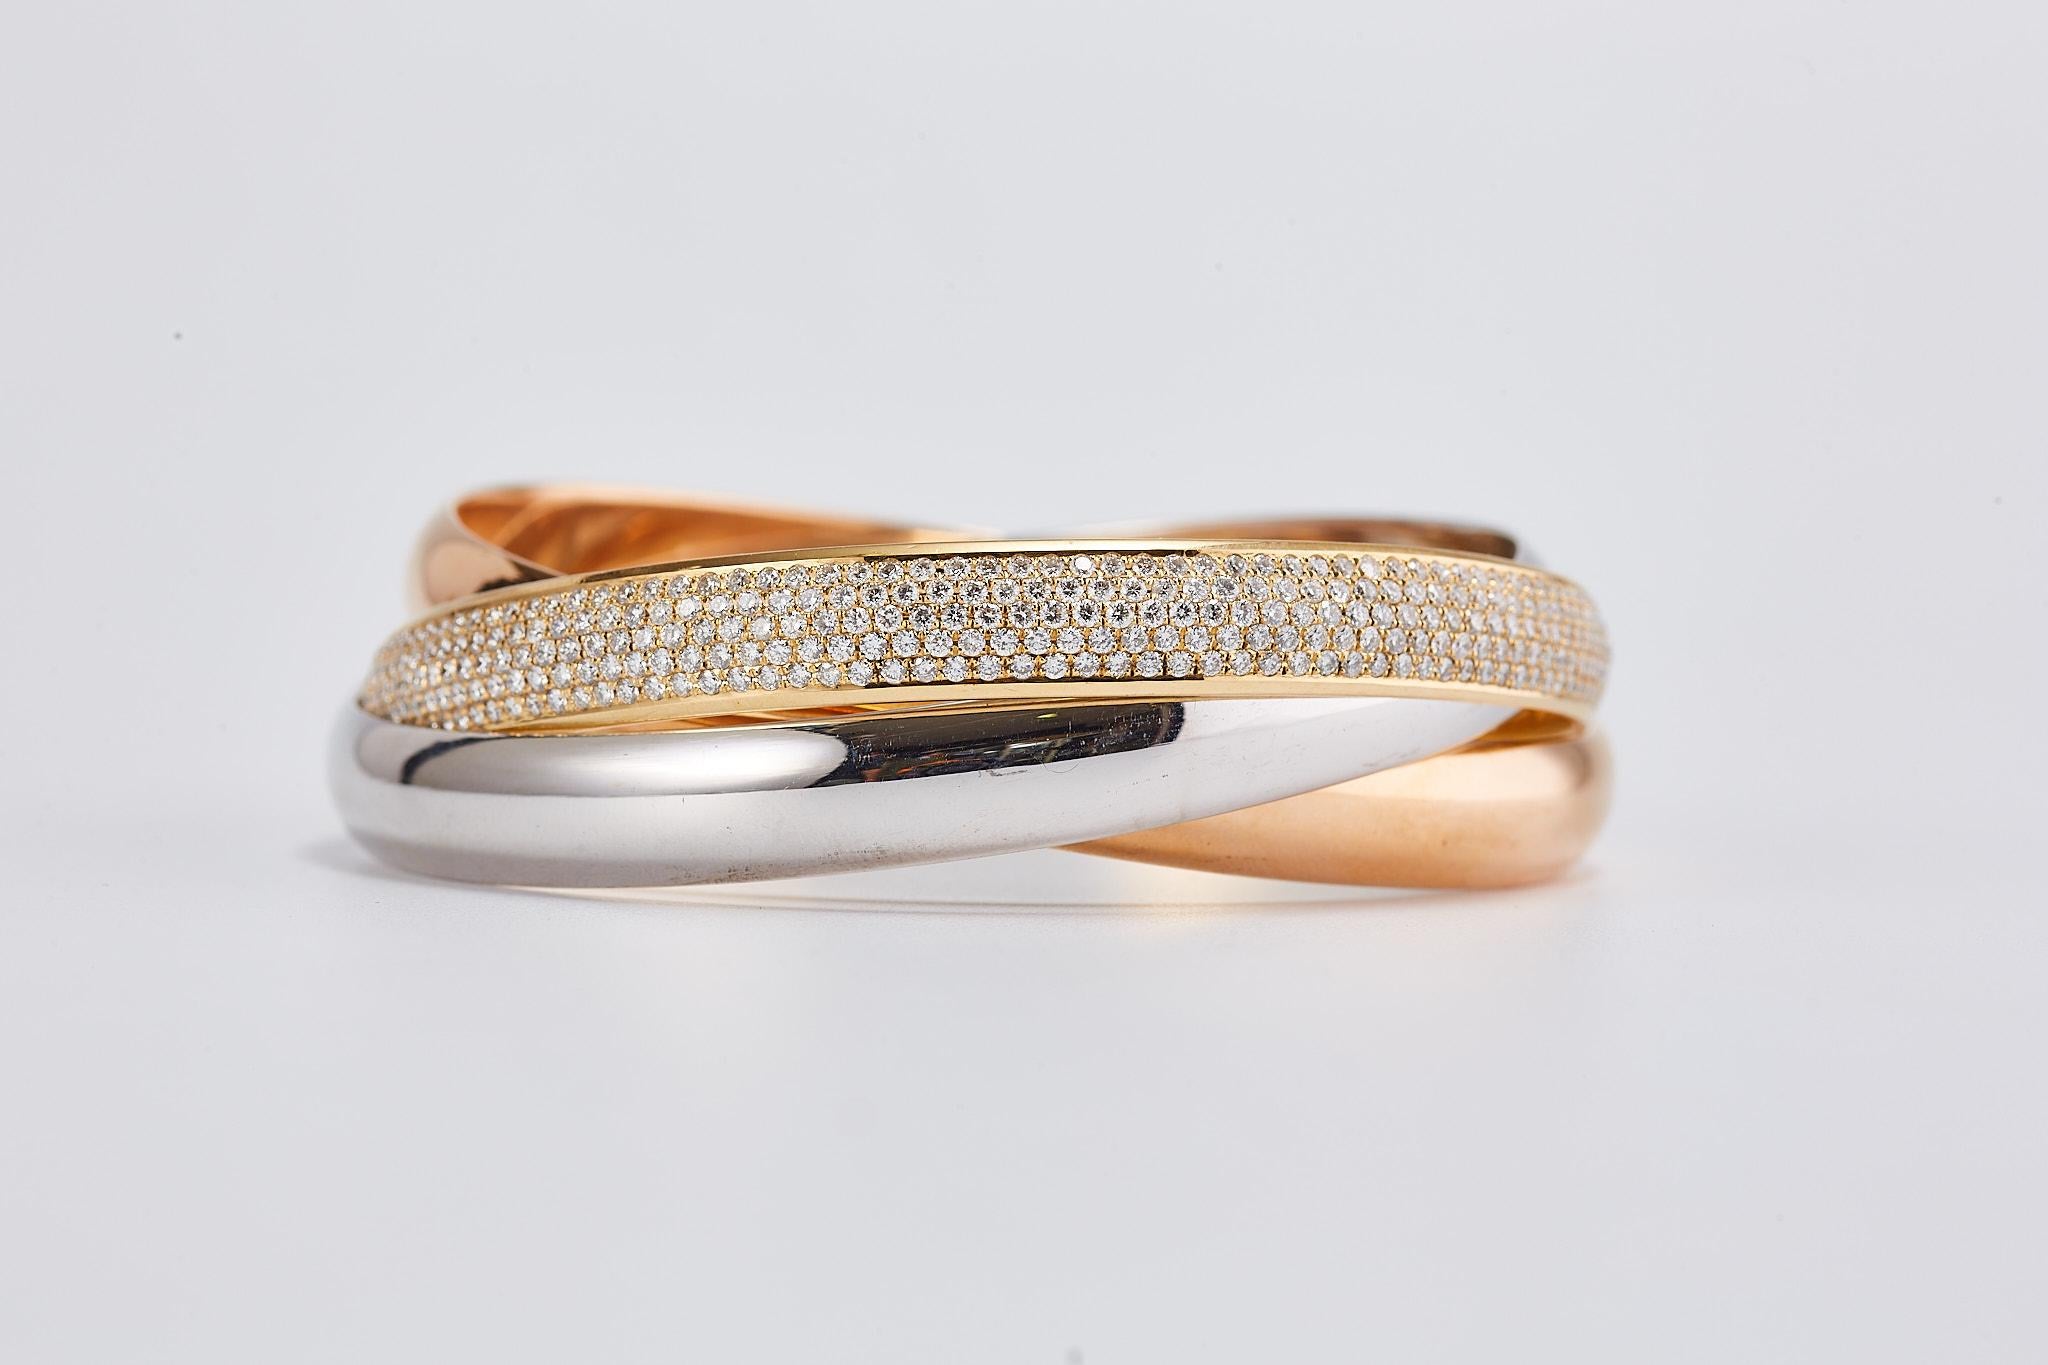 CARTIER Tri-Color Diamond Trinity Bangle Bracelet

Three bands. Three types of gold. Intertwined in harmony. The visionary mind of Louis Cartier introduced the Trinity collection in 1924. The unique, timeless, and cosmic Trinity design, depicted in